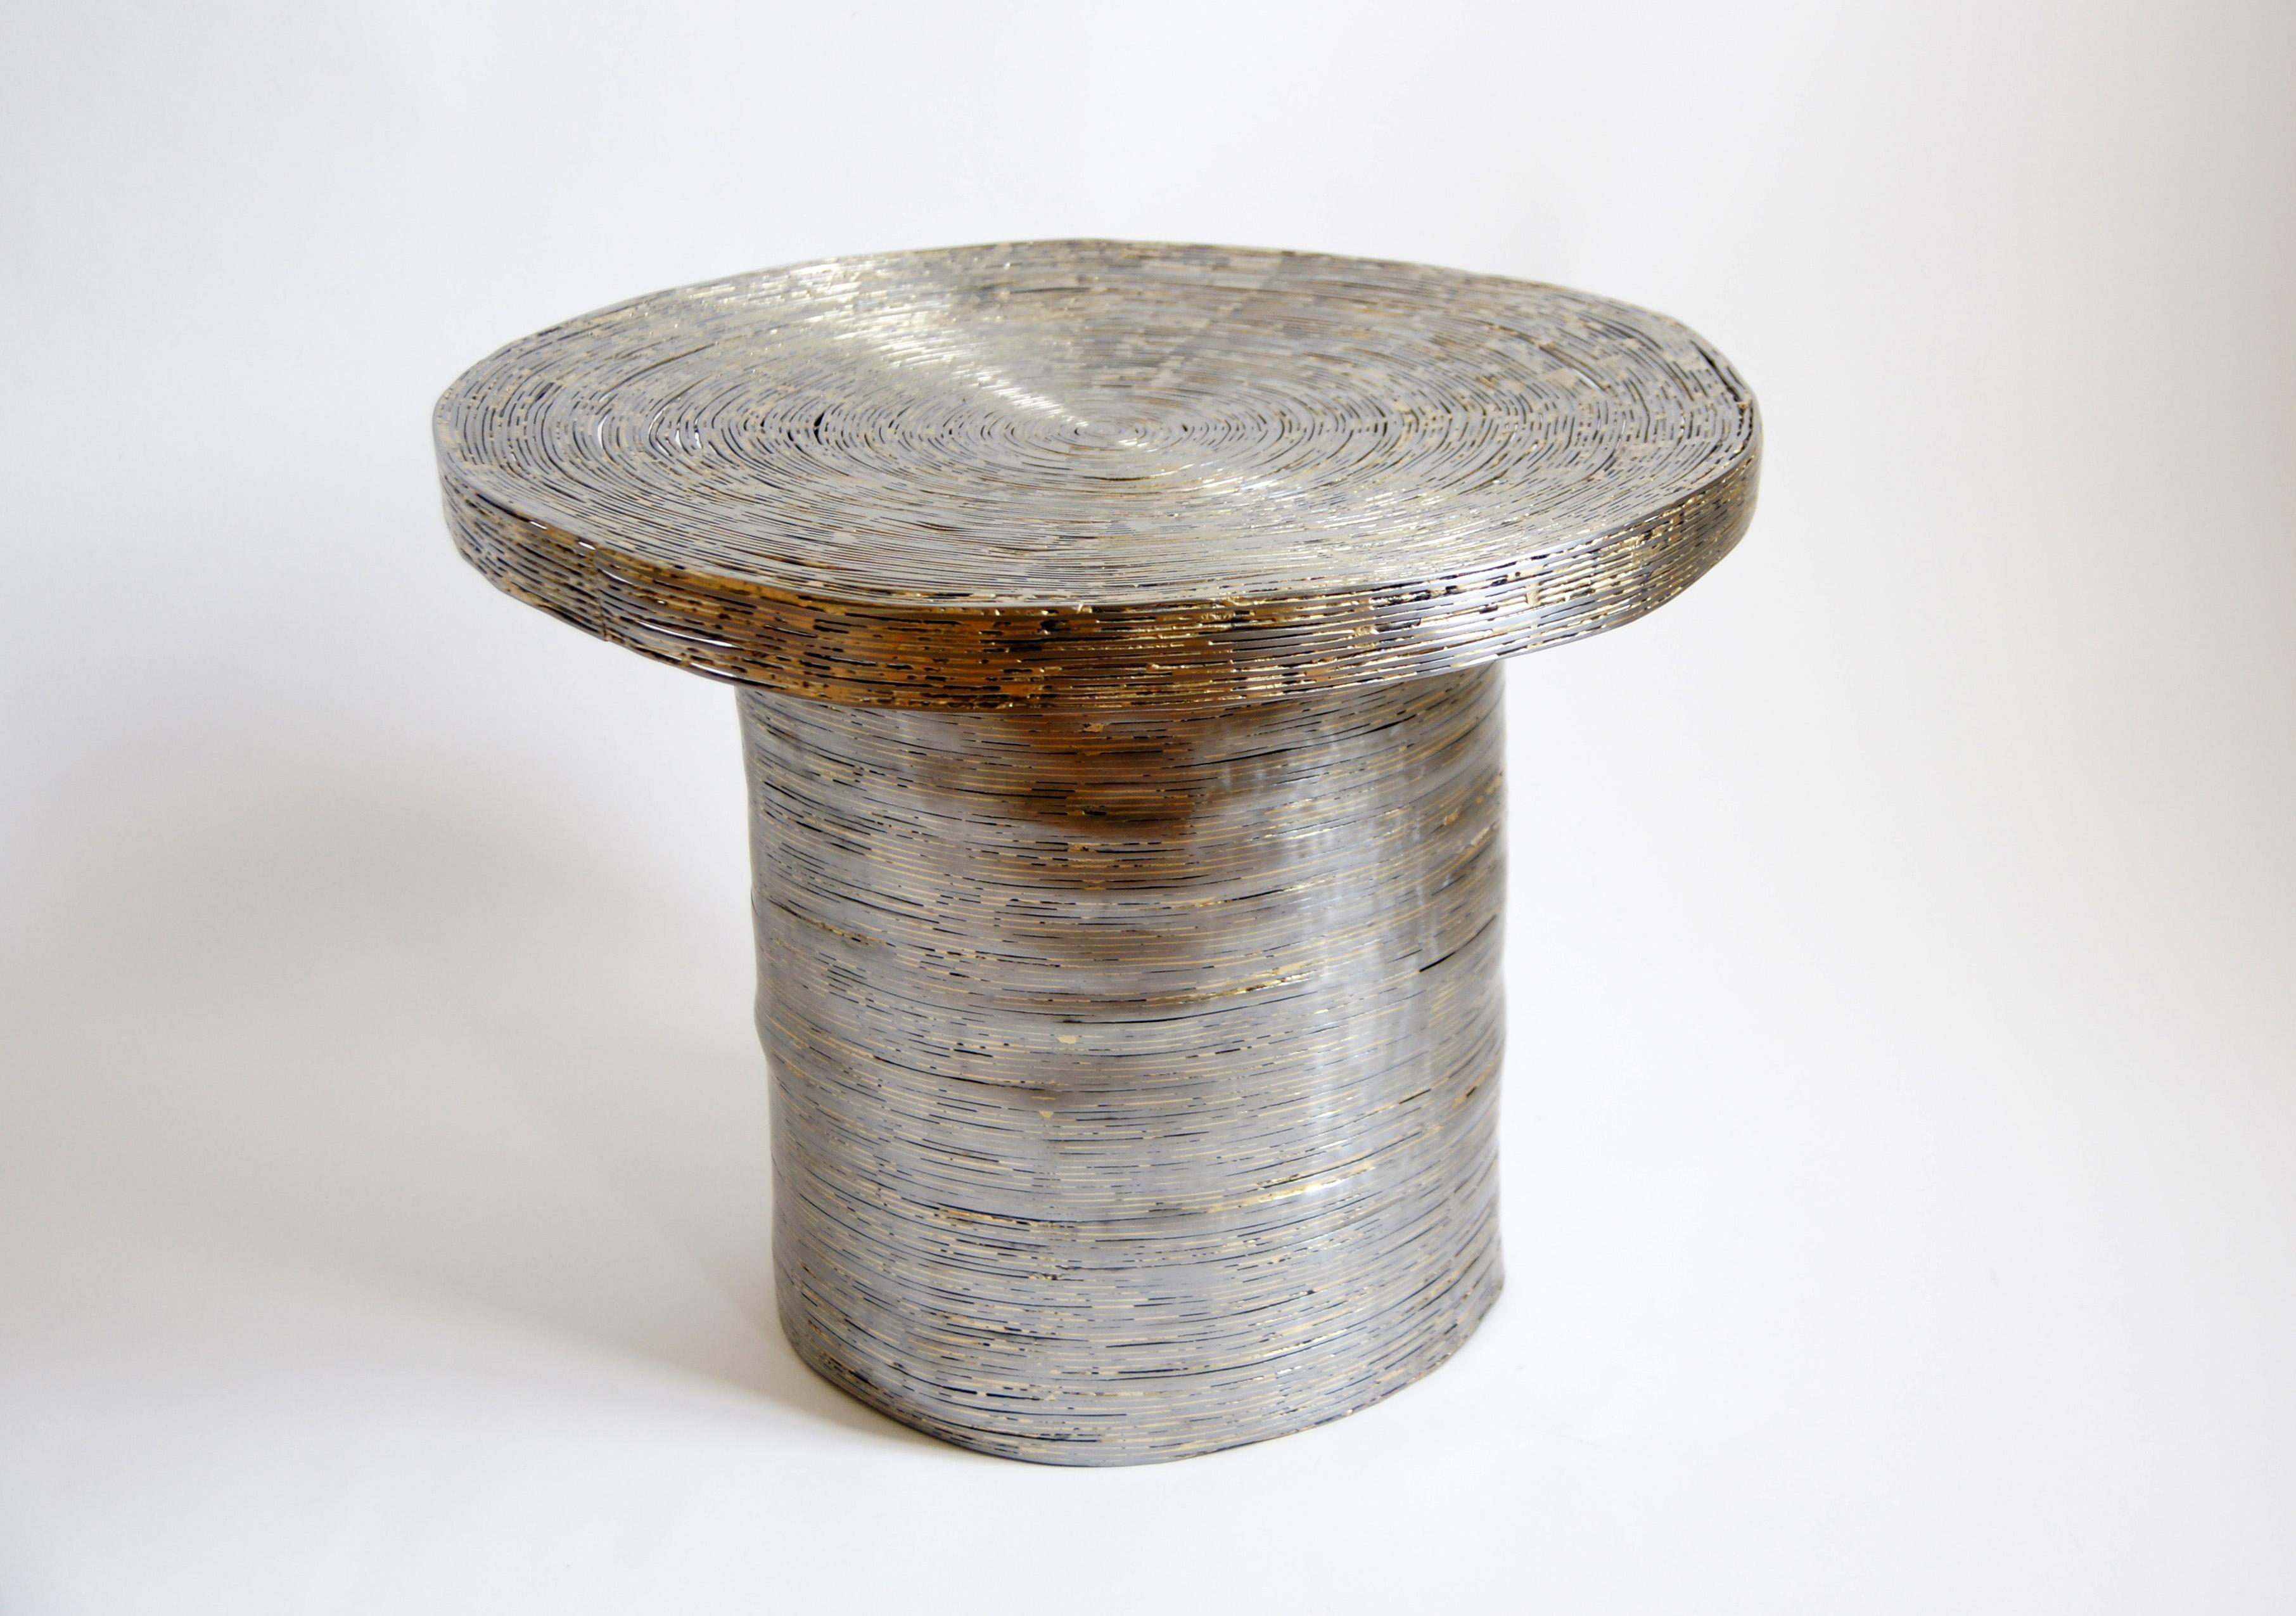 Wrap side table by Johannes Hemann
Material: Steel.
Dimensions: Ø 60 x H 55 cm.

All our lamps can be wired according to each country. If sold to the USA it will be wired for the USA for instance.

Wrap examines the shells of things remaining